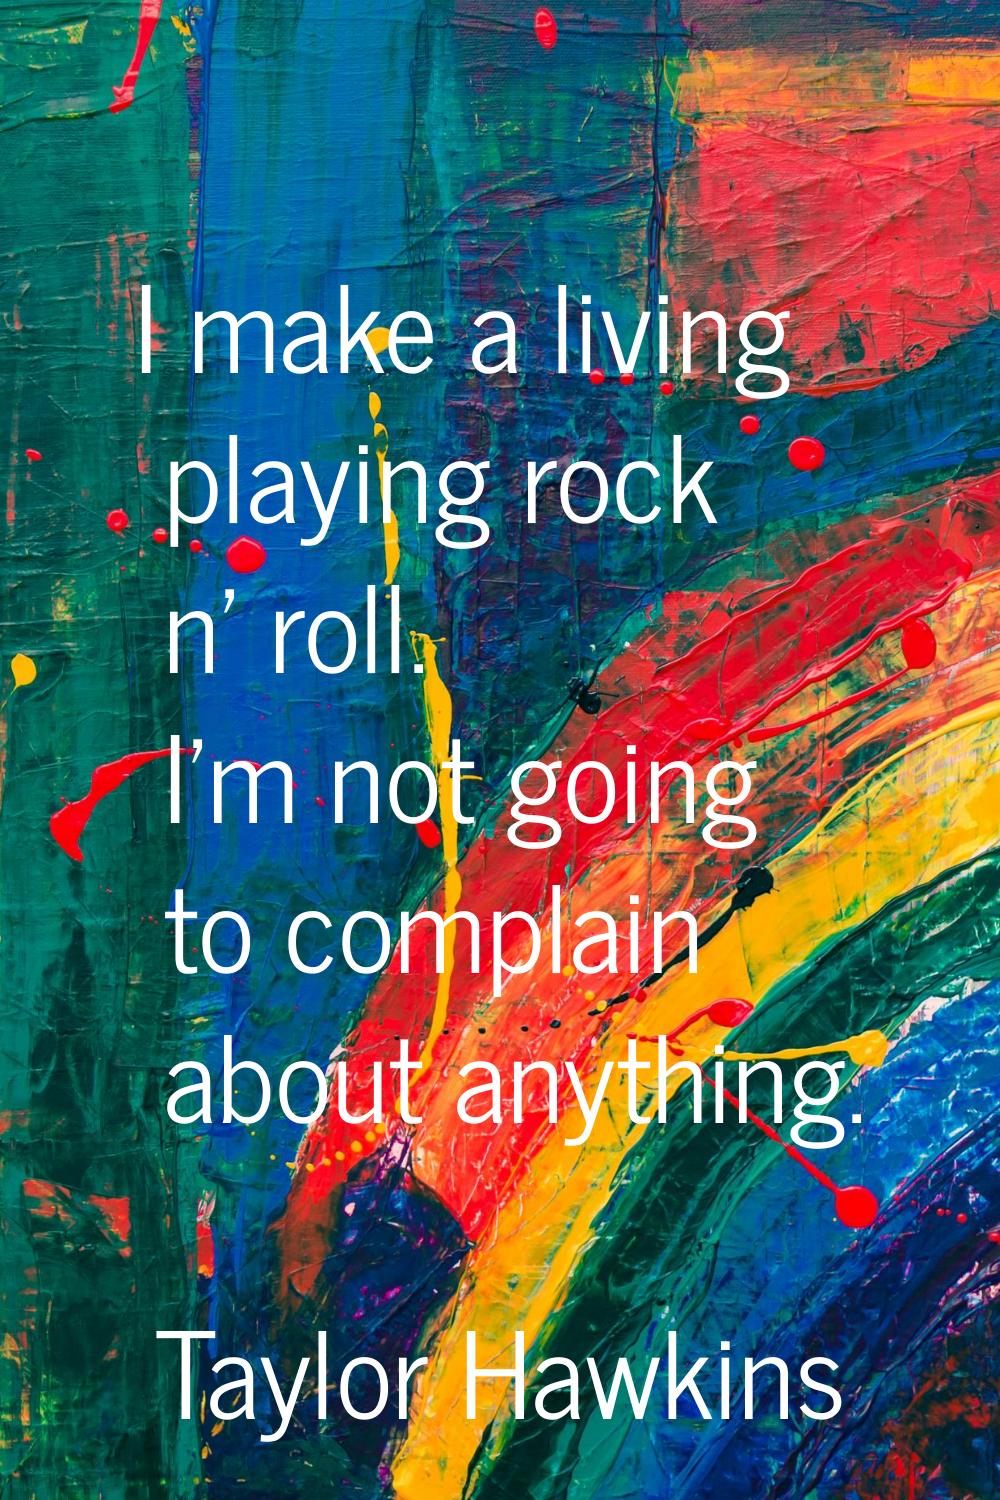 I make a living playing rock n' roll. I'm not going to complain about anything.